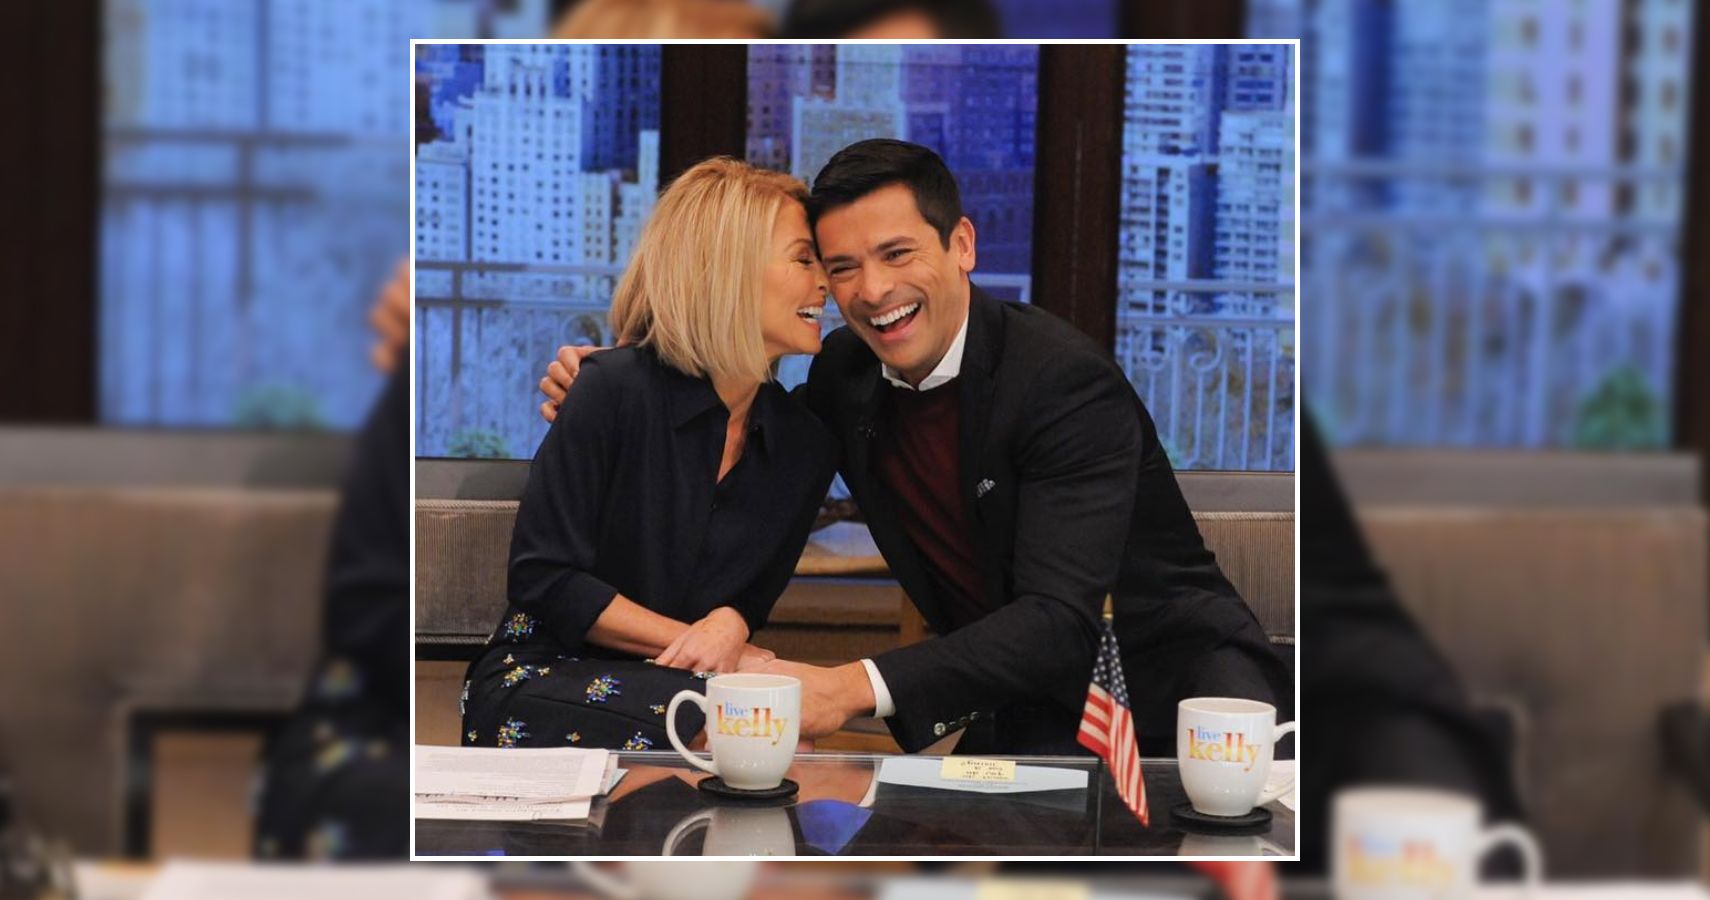 Kelly Ripa and Her Husband Give Laptops, Scholarships to Homeless Students